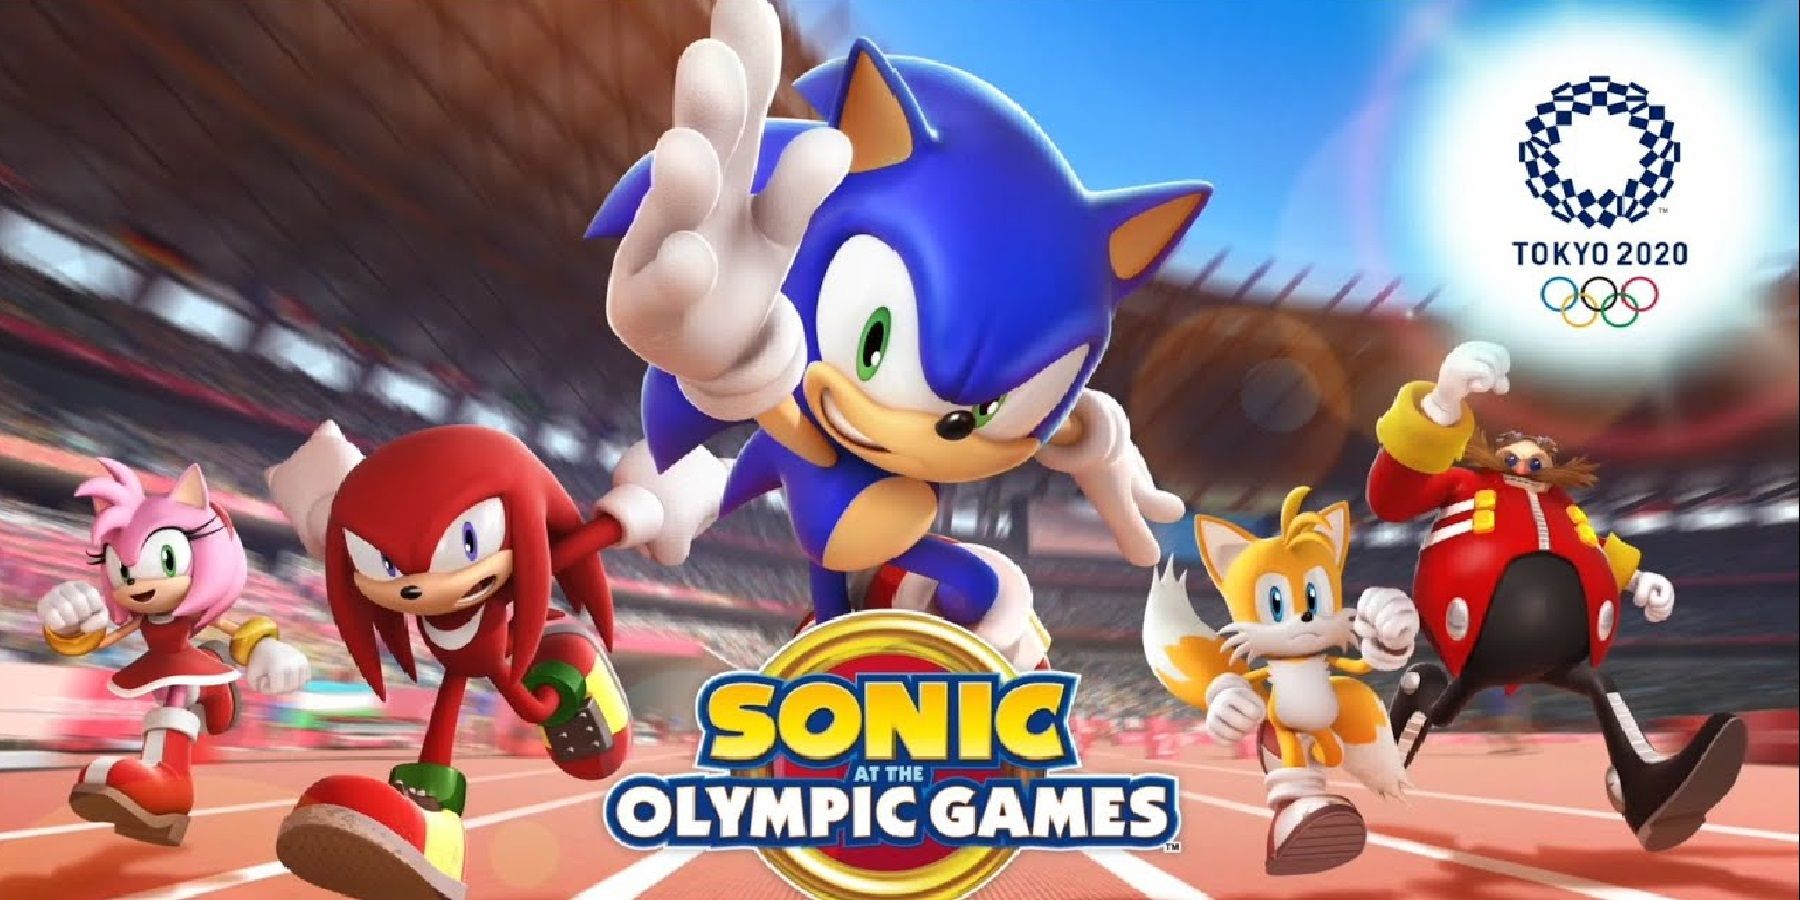 Rumor: New Sonic Olympics Game Could Be in the Works Without Mario